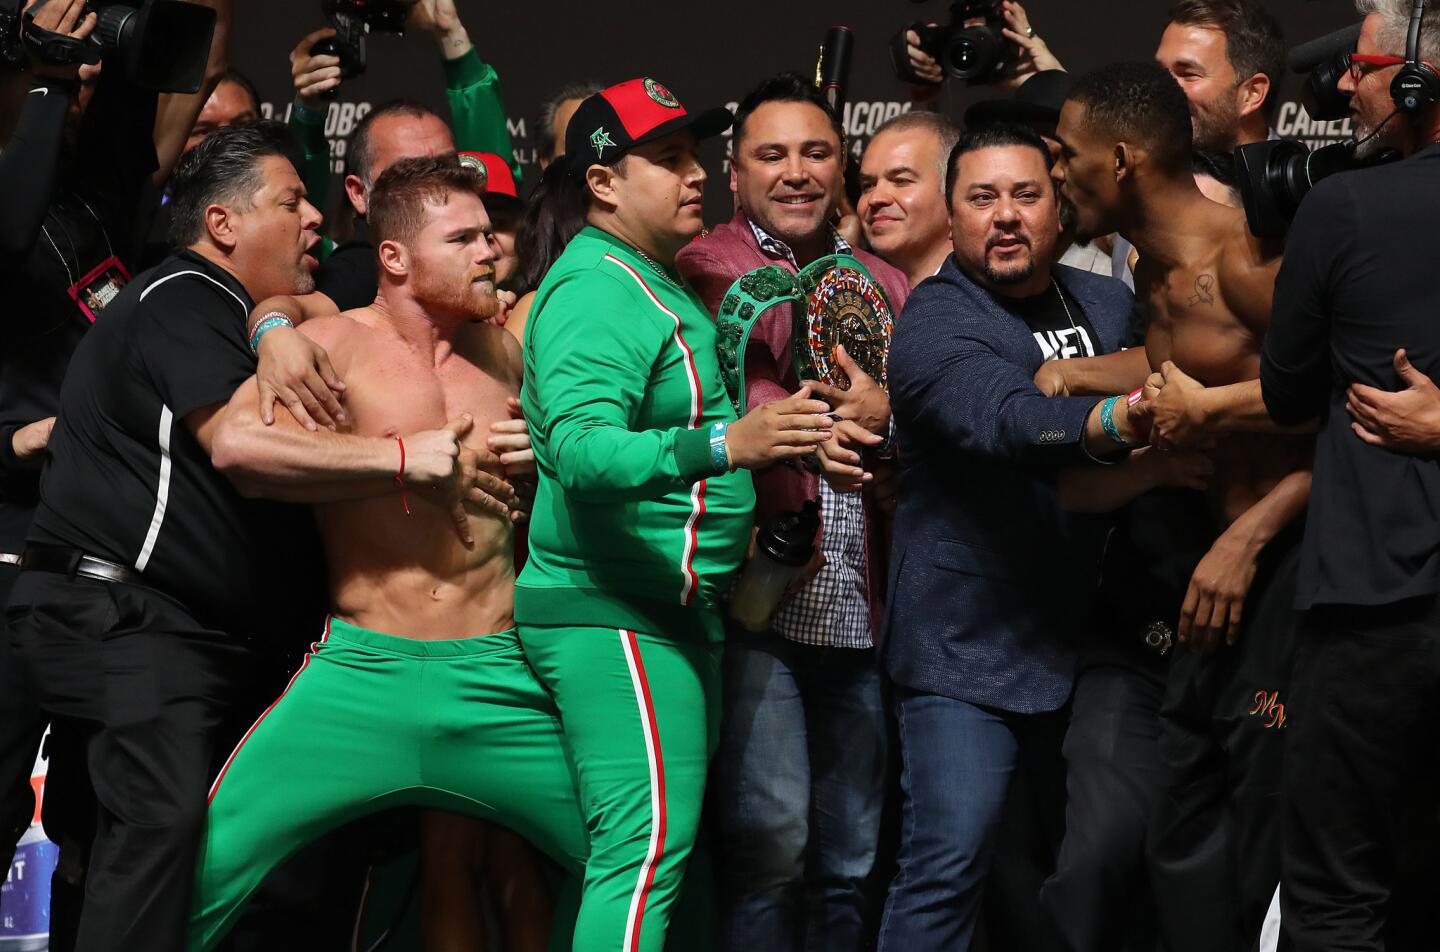 LAS VEGAS, NEVADA - MAY 03: Canelo Alvarez and Daniel Jacobs get into a shoving match during their official weigh in at T-Mobile Arena on May 3, 2019 in Las Vegas, Nevada. Alvarez and Jacobs will fight to unify the WBC WBA and IBF Titles on May 04, 2019 at T-Mobile Arena. (Photo by Al Bello/Getty Images) ** OUTS - ELSENT, FPG, CM - OUTS * NM, PH, VA if sourced by CT, LA or MoD **